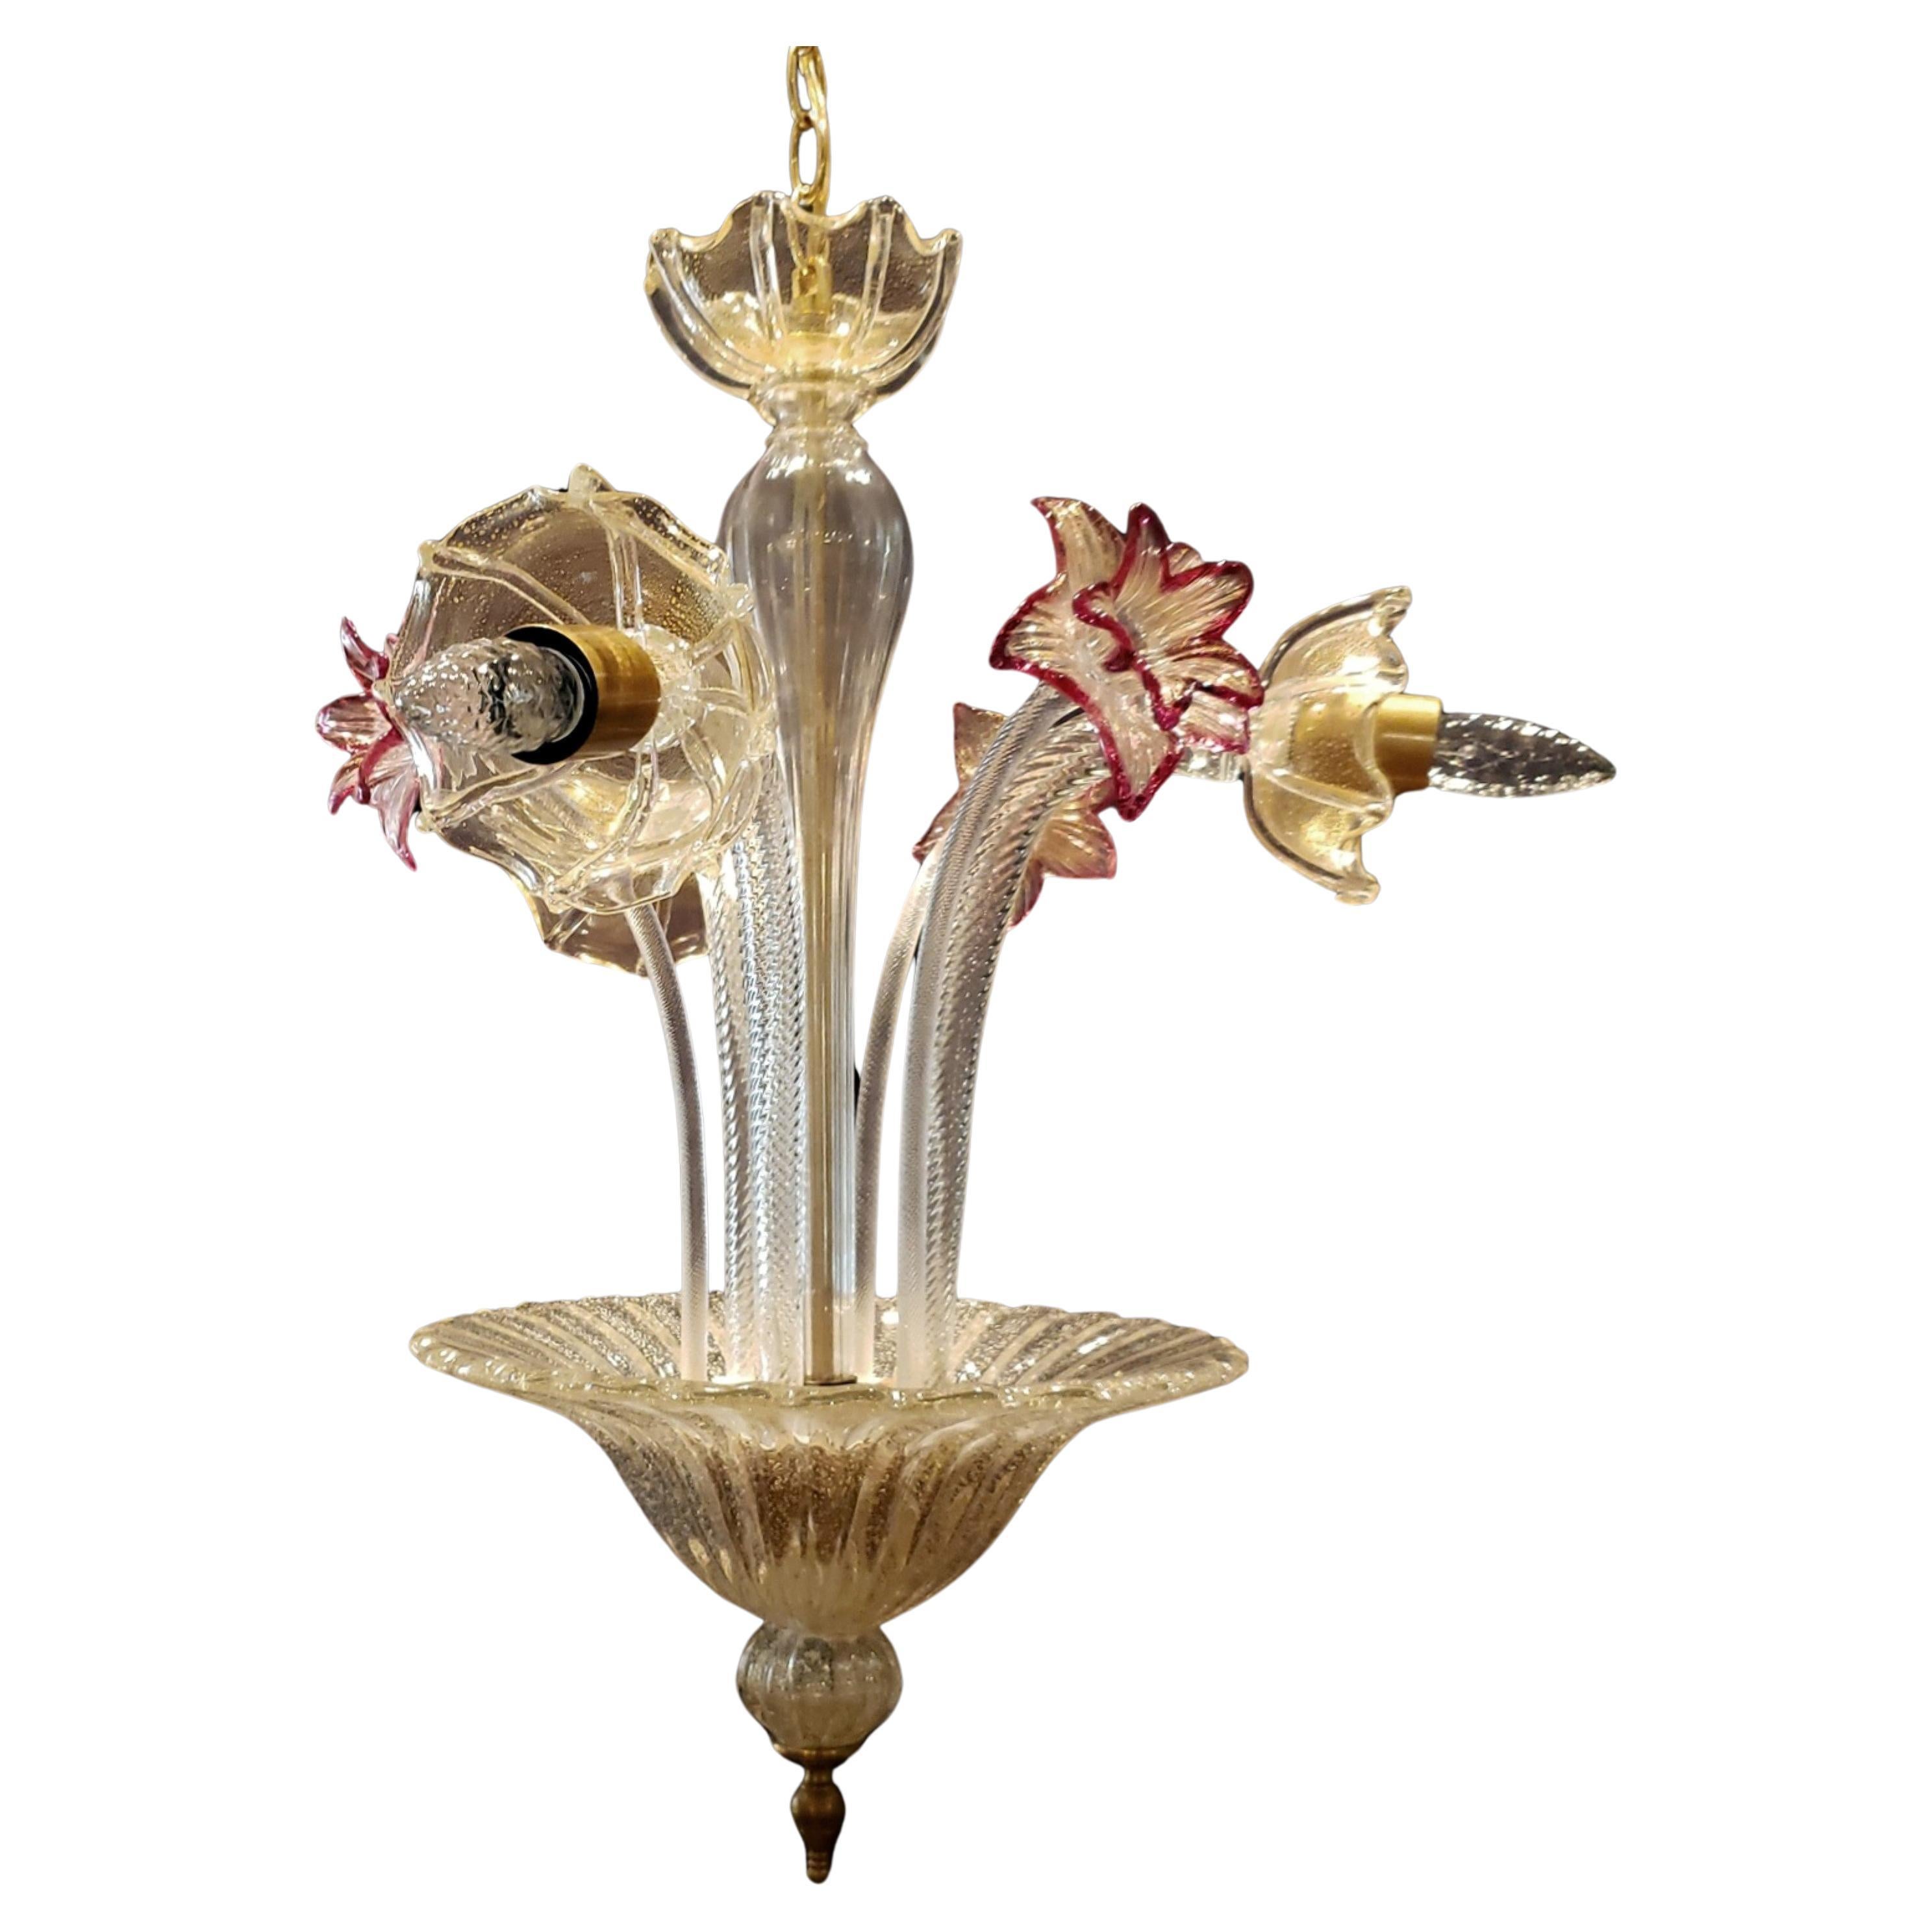  Murano Crystal Chandelier w Gold Rose Inflections 3 Arms  For Sale